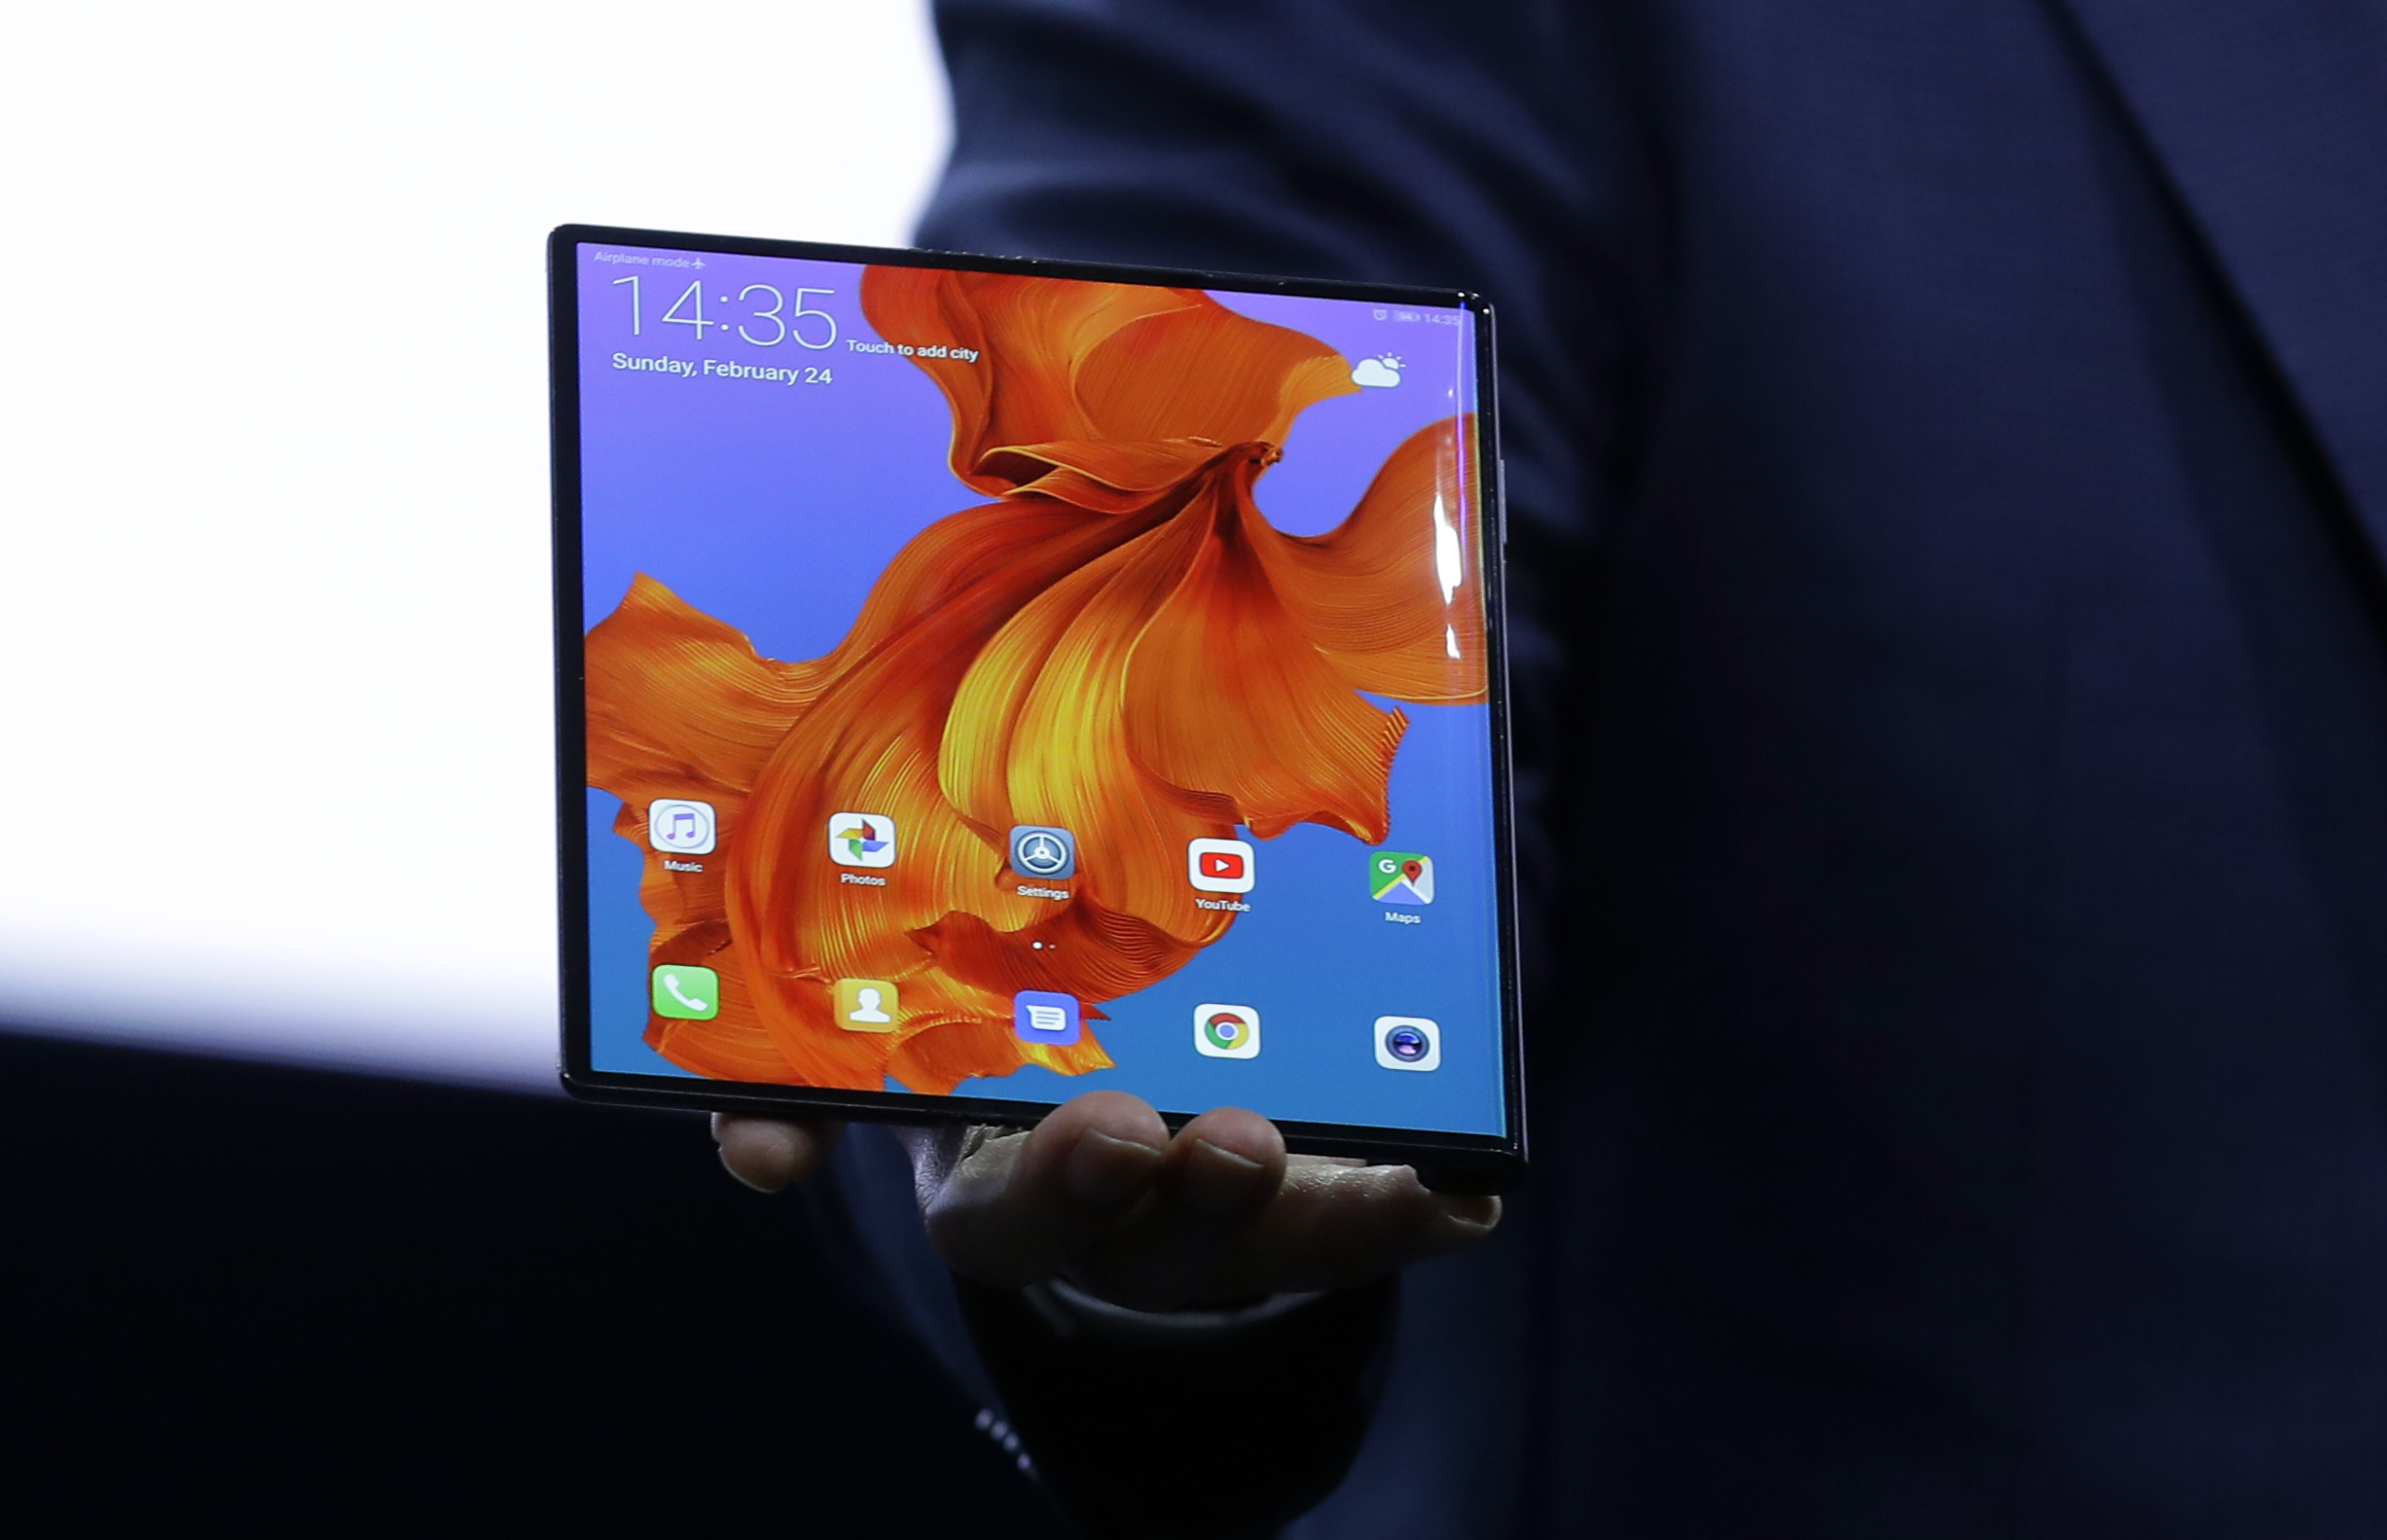 China's Huawei unveils 5G phone with folding screen